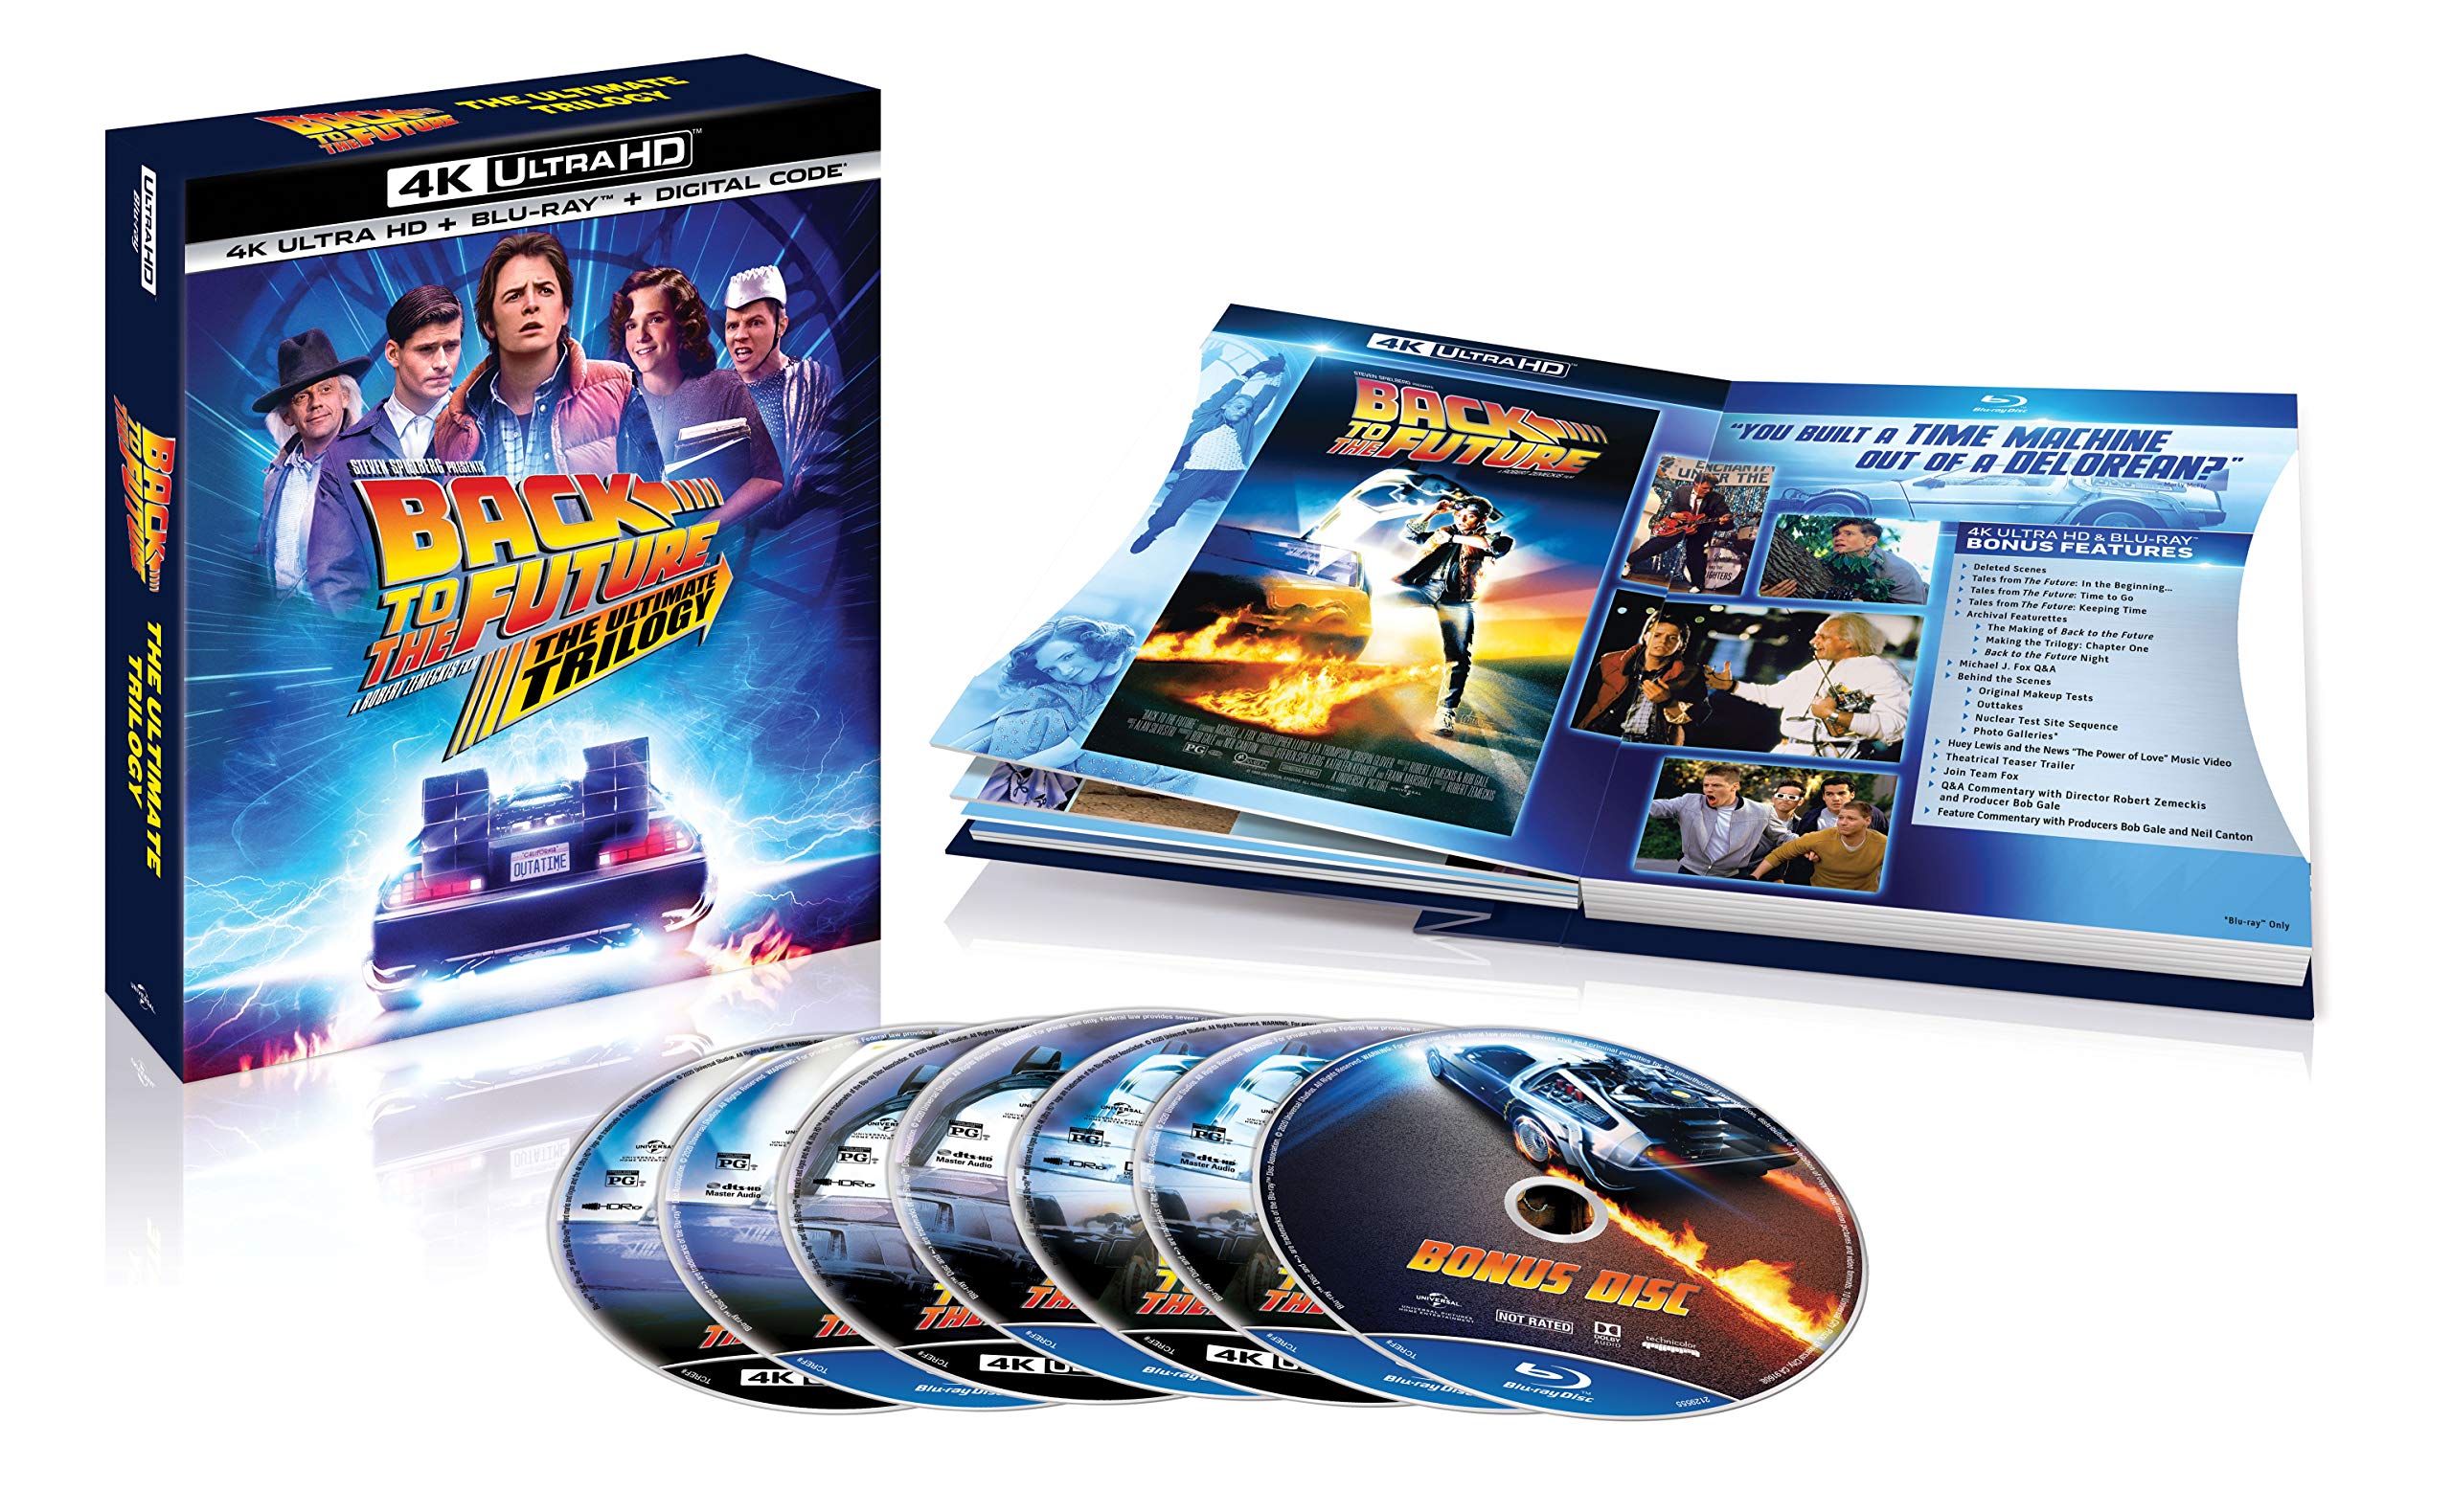 Back to the Future: The Ultimate Trilogy 4K Ultra HD